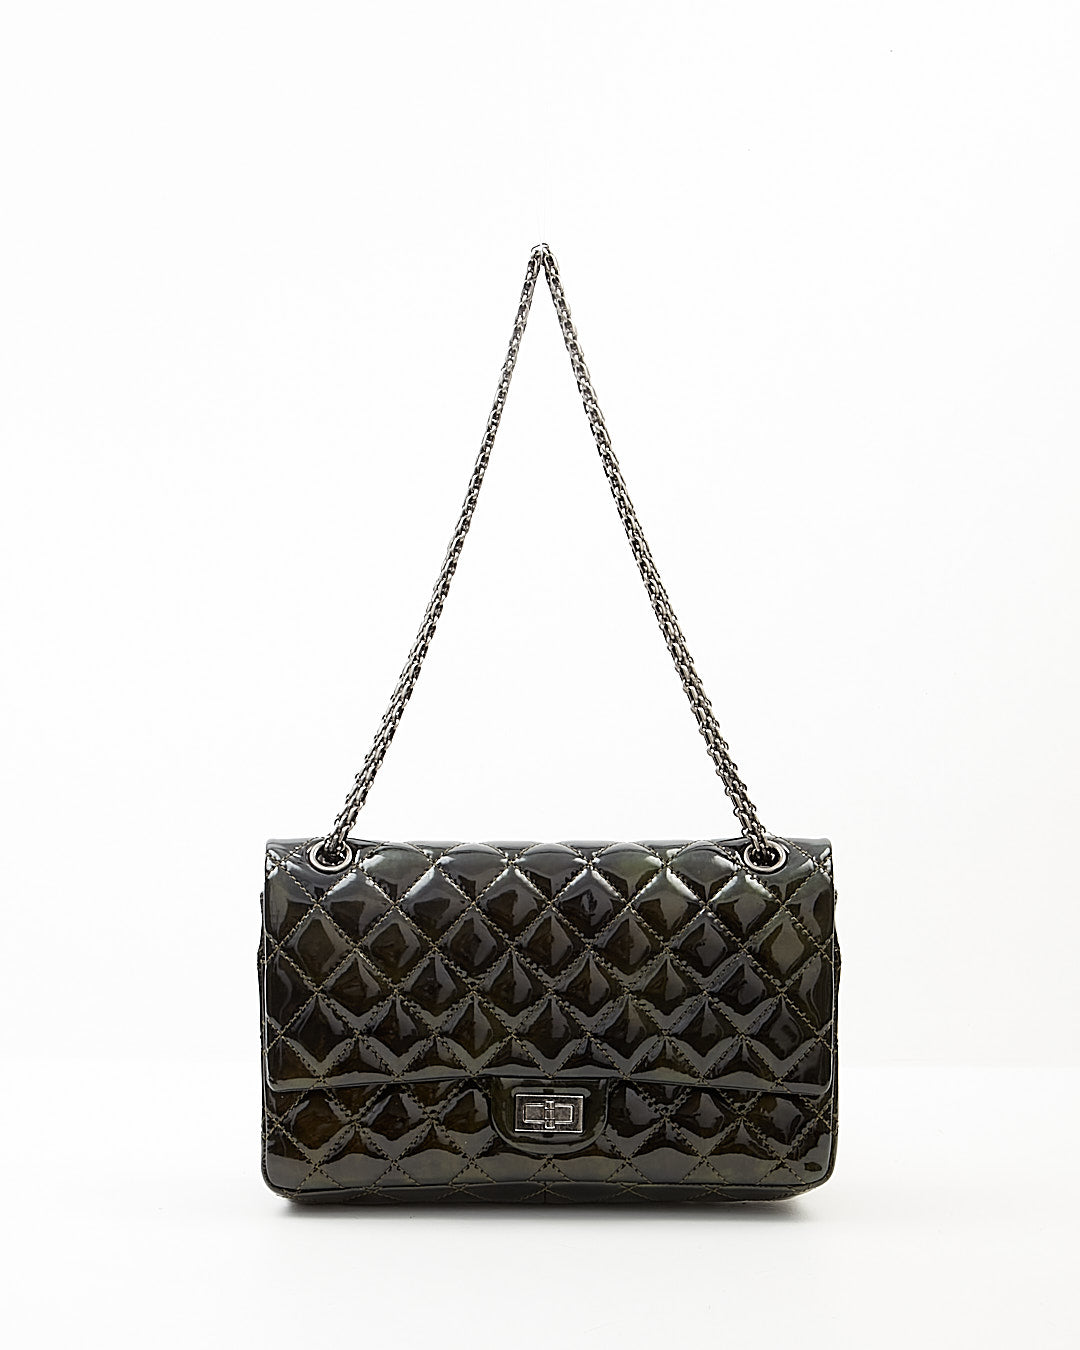 Chanel Black/Green Irridescent Patent Reissue 226 Double Flap Bag